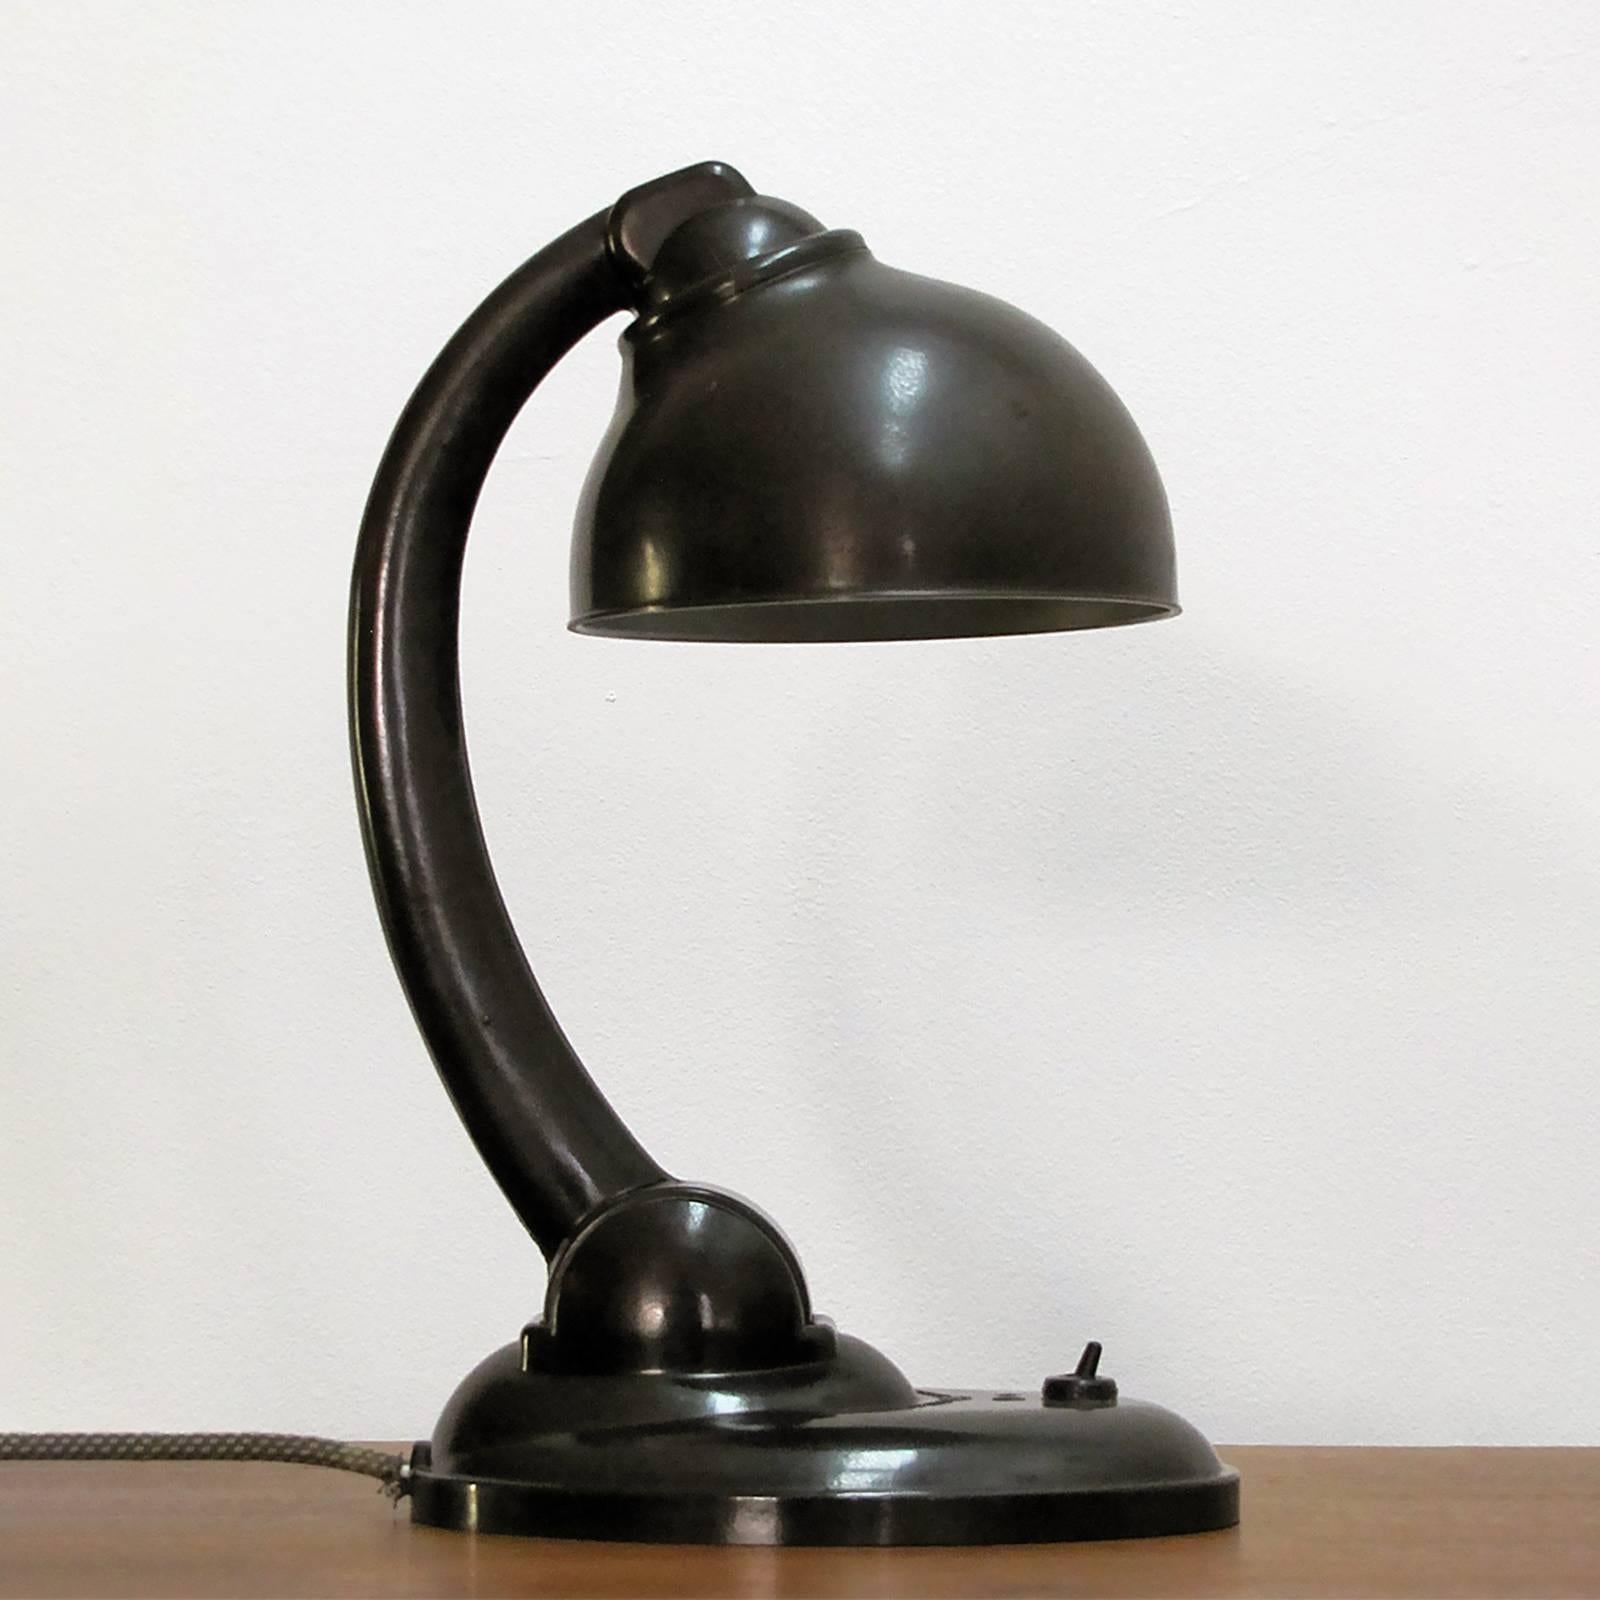 Wonderful bakelite table lamp by E.K.Cole for ESC, the shade is mounted to a shoulder joint and can be adjusted in all directions, the curved swivel arm rests on a streamlined base with an individual on/off switch, newly wired with textile cable and